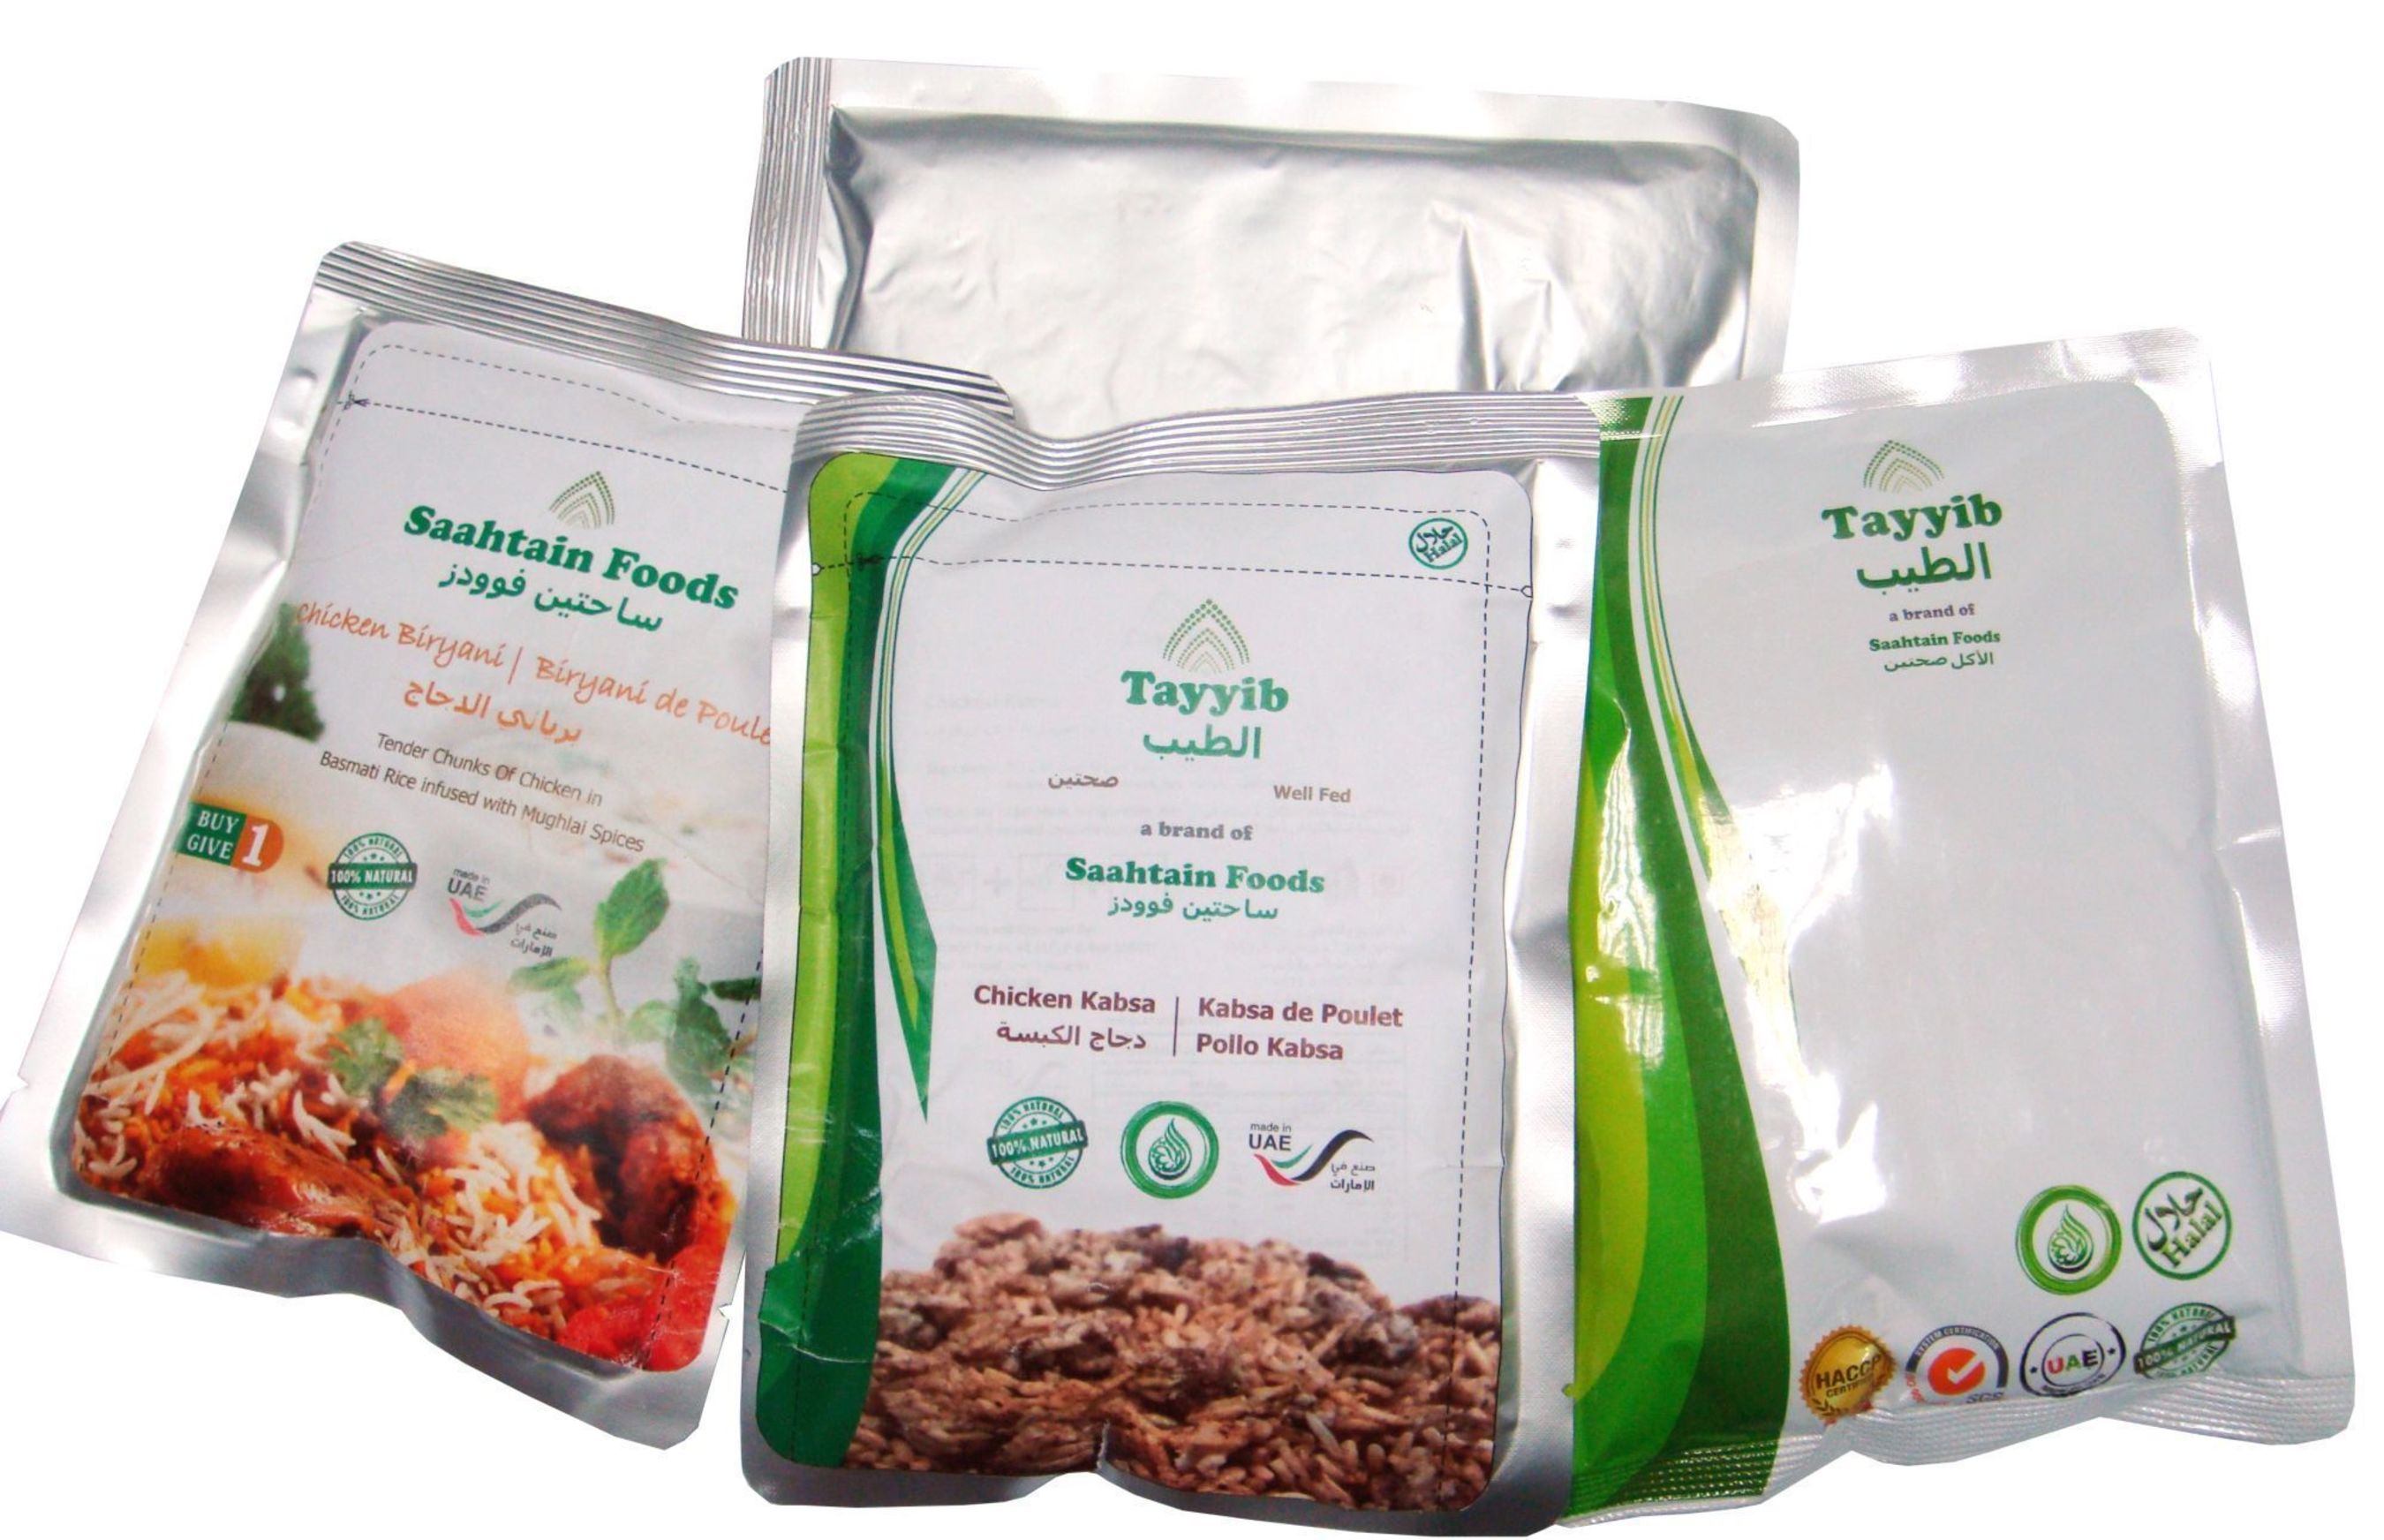 Tayyib Ready to Eat Meals last for 2 years in strong 4 layer pouches (PRNewsFoto/Saahtain Foods)